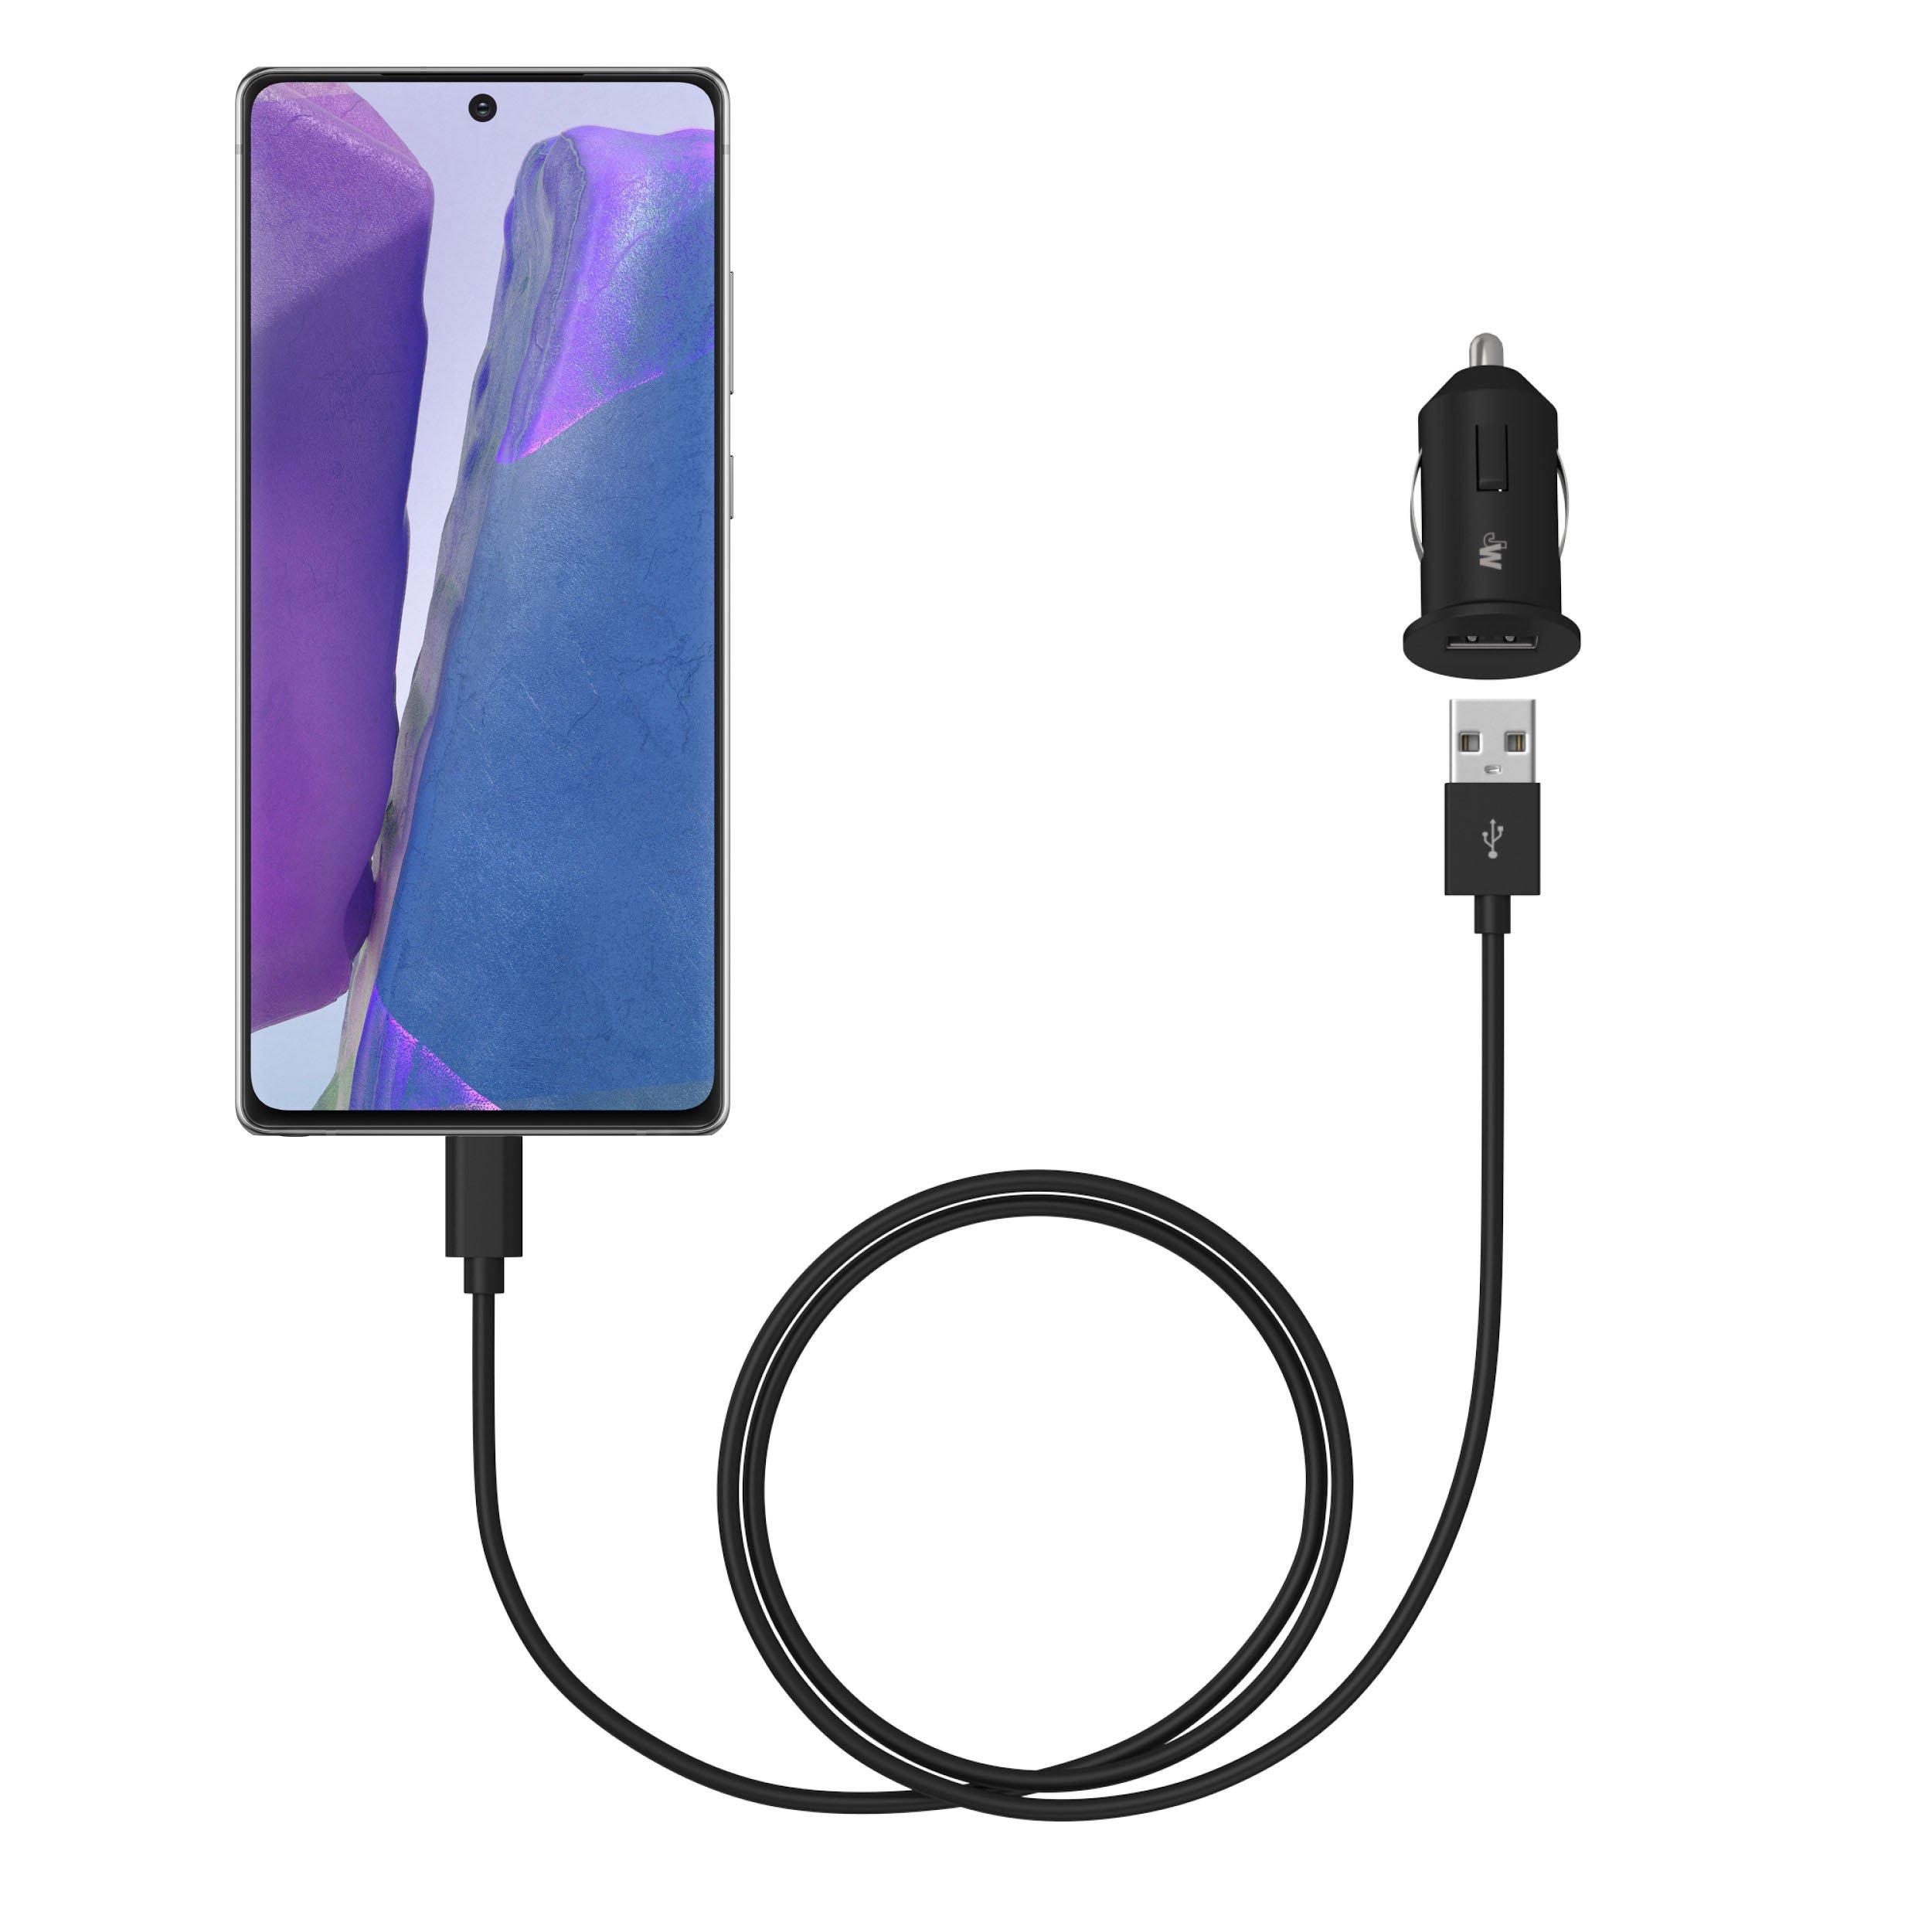 Just Wireless Car Charger with 6-ft USB to USB-C Cable